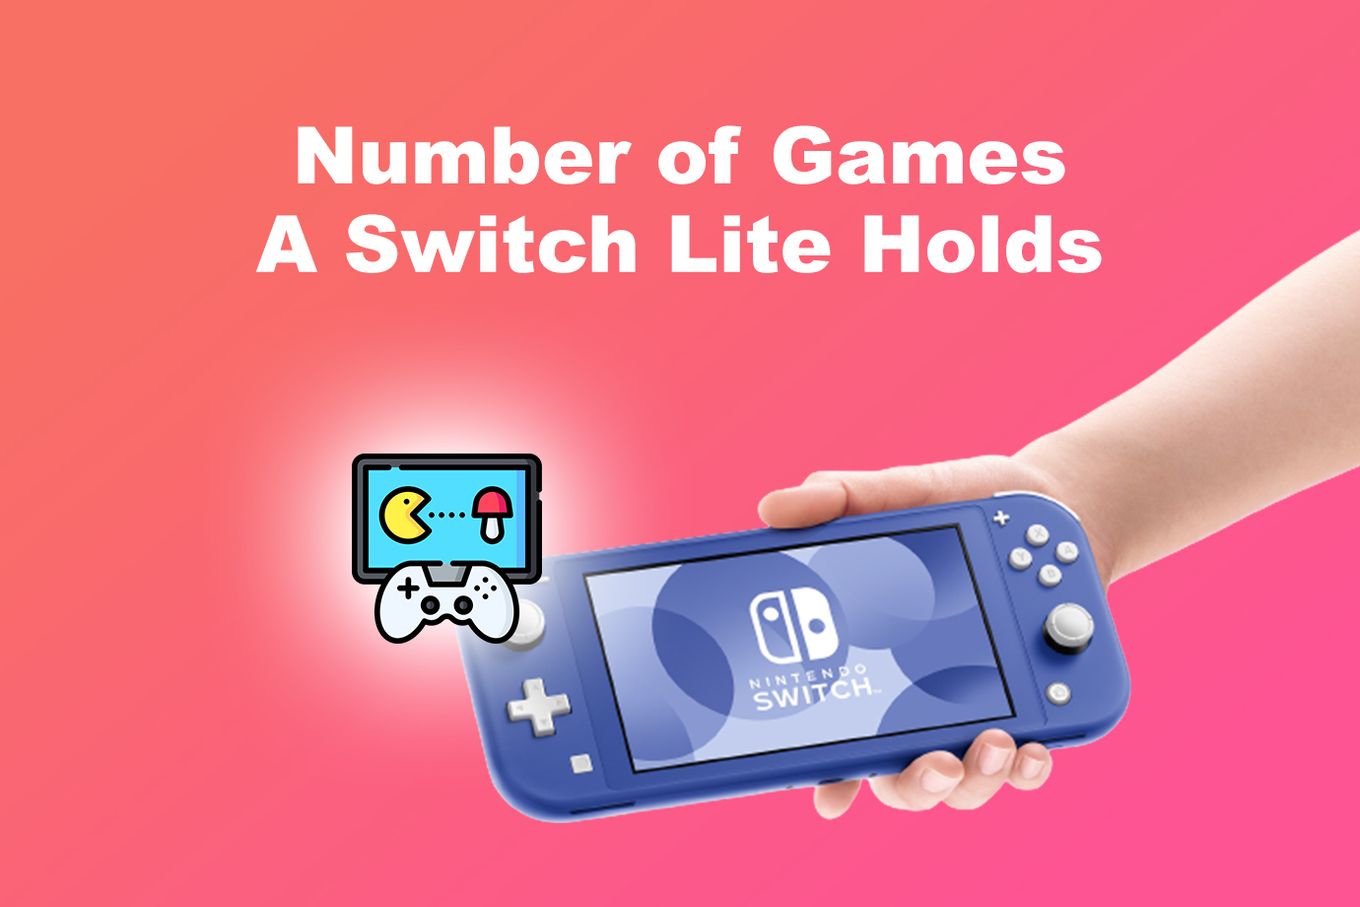 Number of Games a Switch Lite Holds